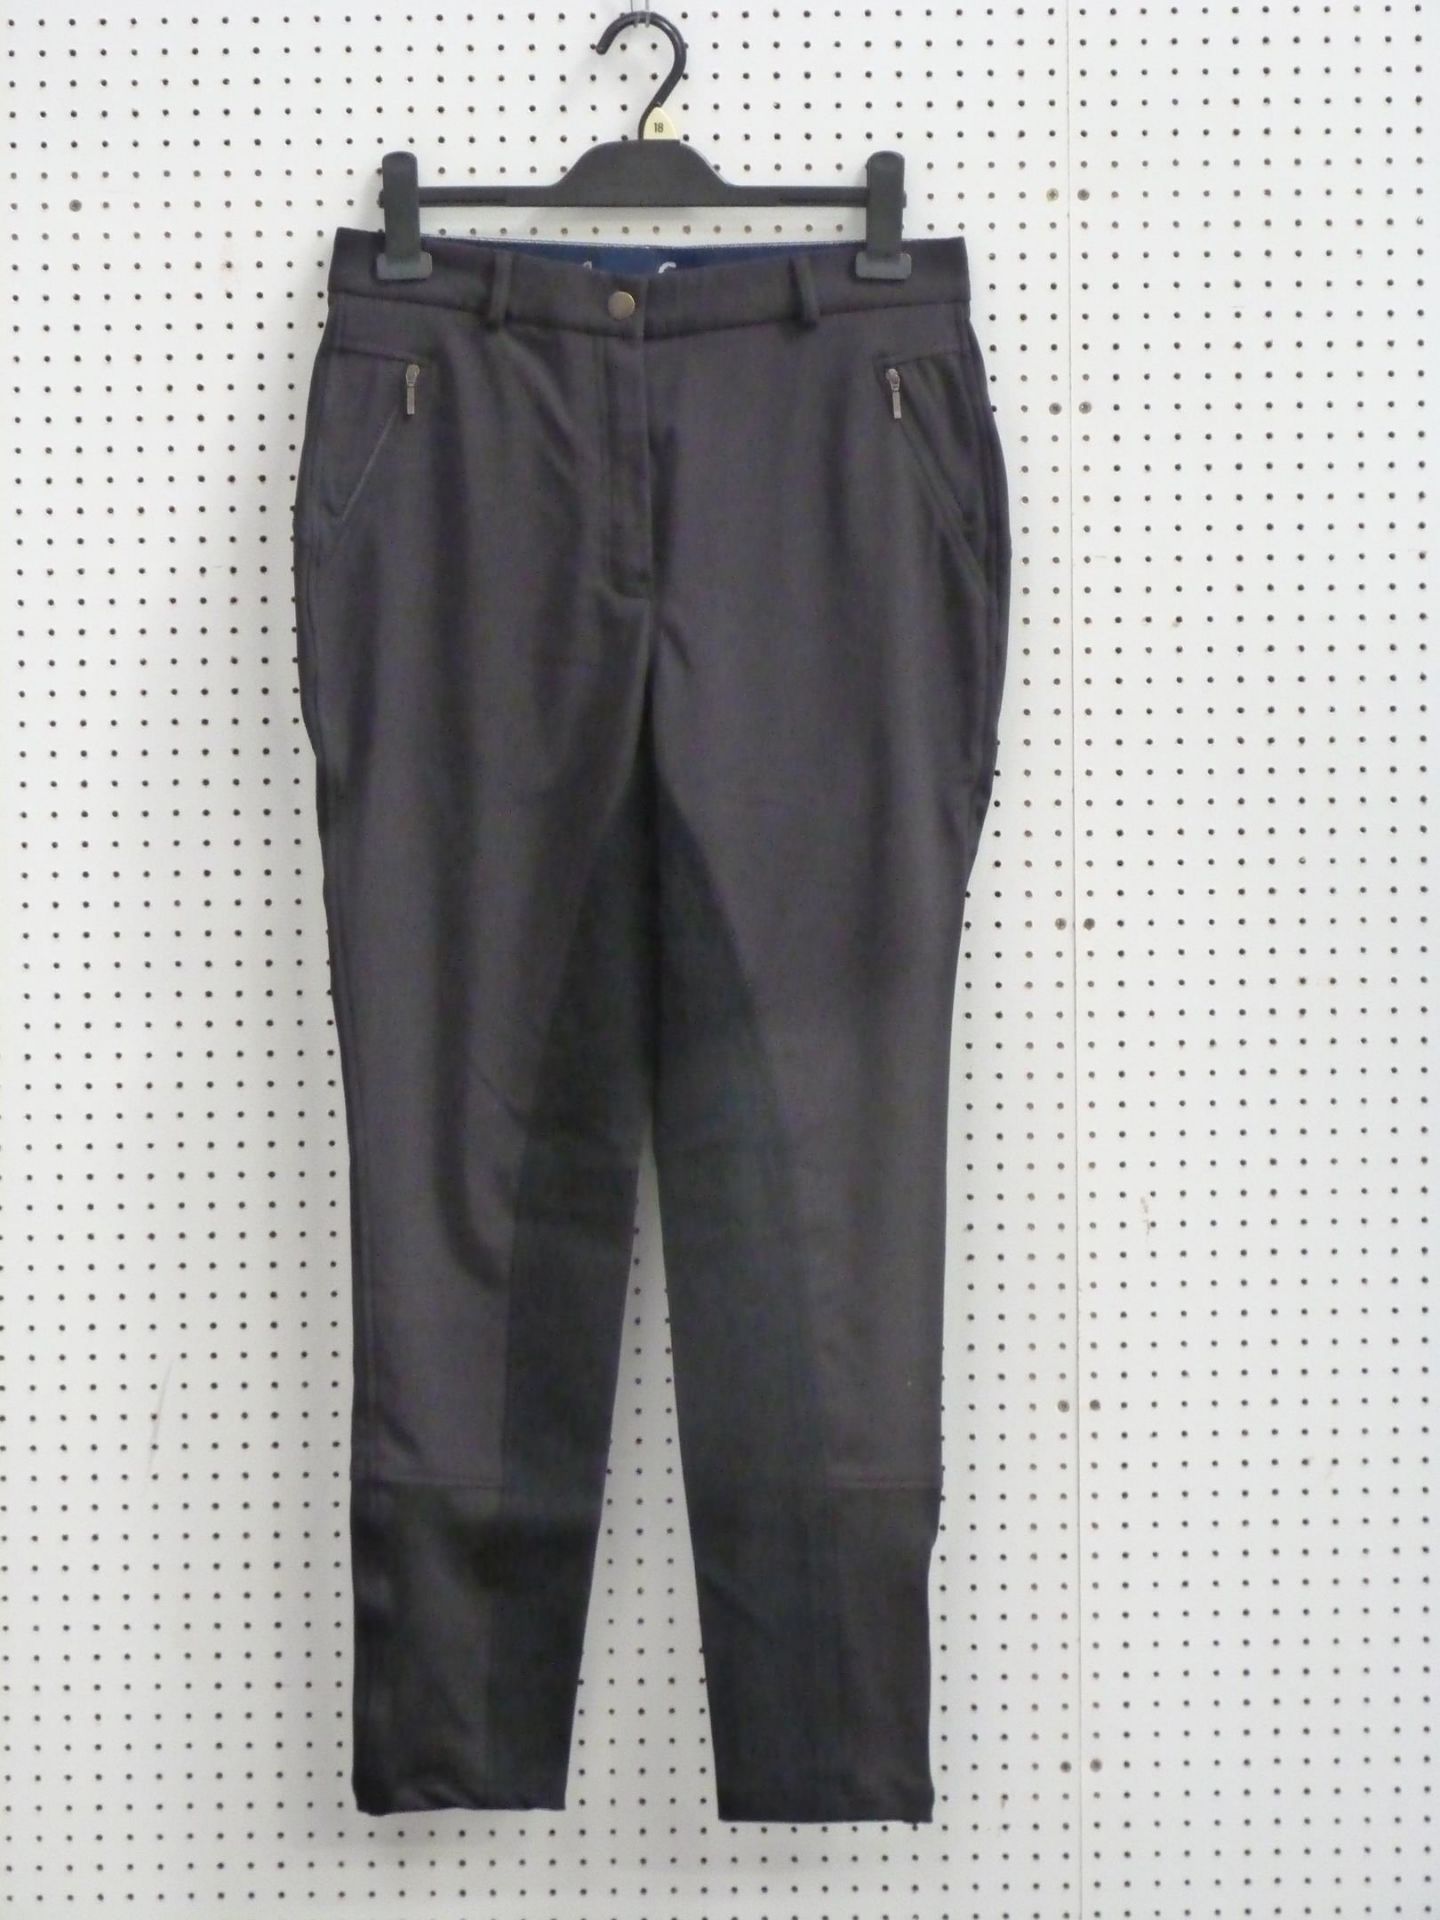 * Two Pairs of New Equatech Winter Breeches in Black. One Pair Size 32 the other size 34 (2) RRP £